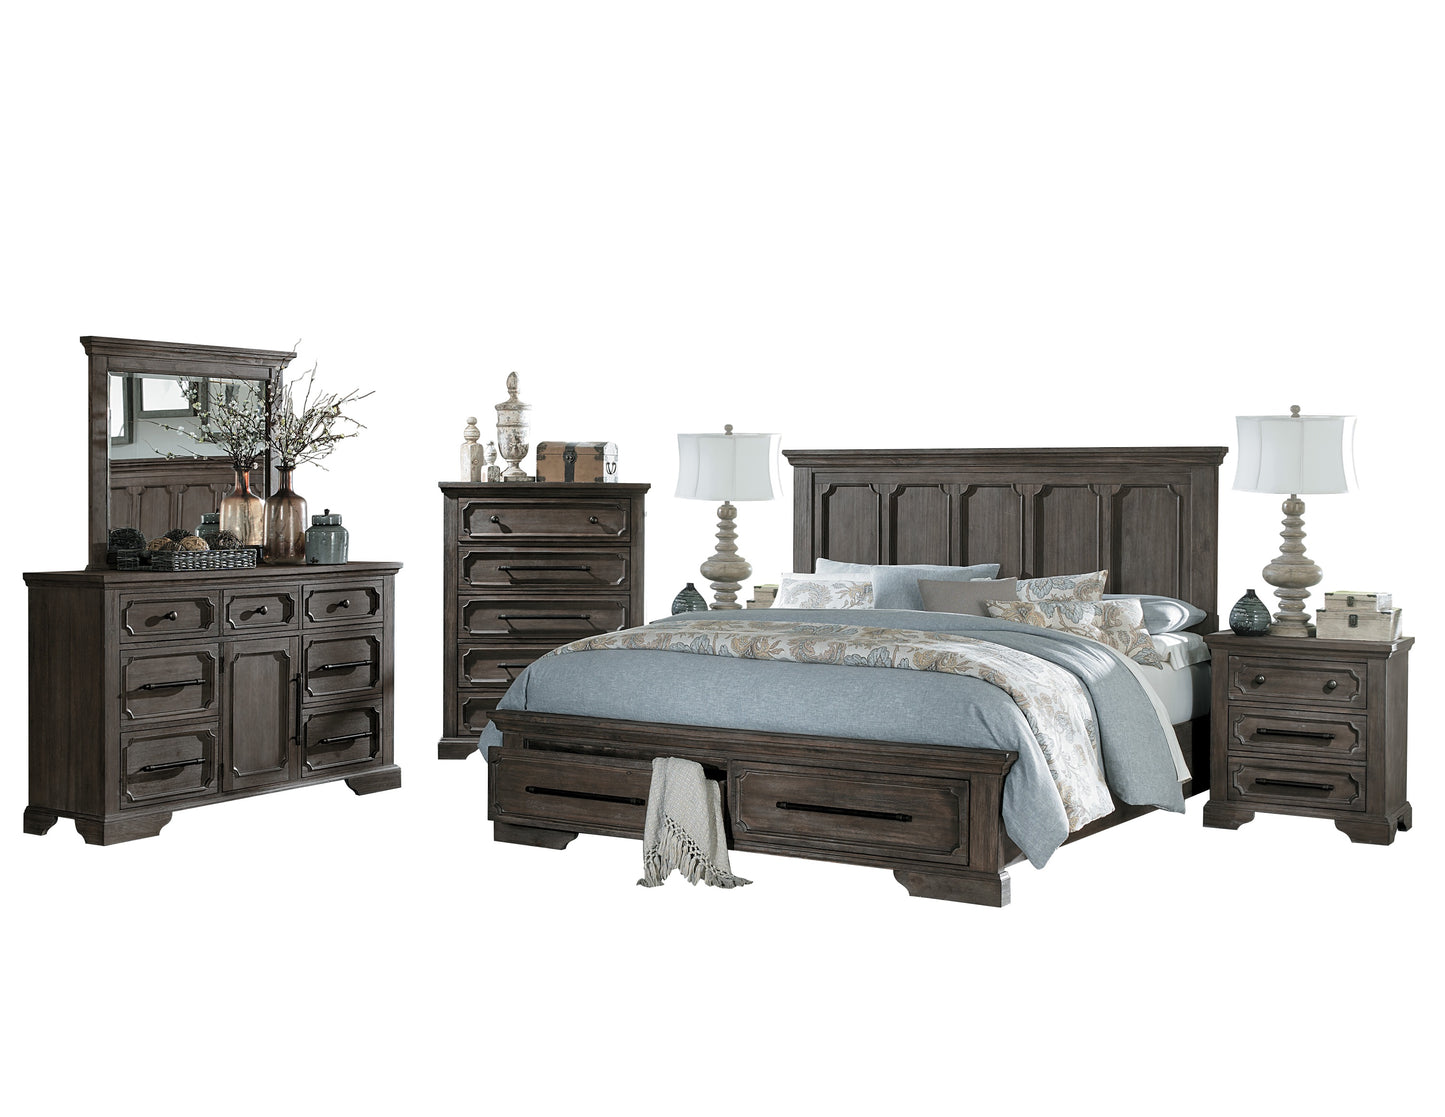 Homelegance Toulon 6PC Bedroom Set Cal King Platform Bed with Footboard Storages Dresser Mirror Two Nightstand Chest in Distressed Oak